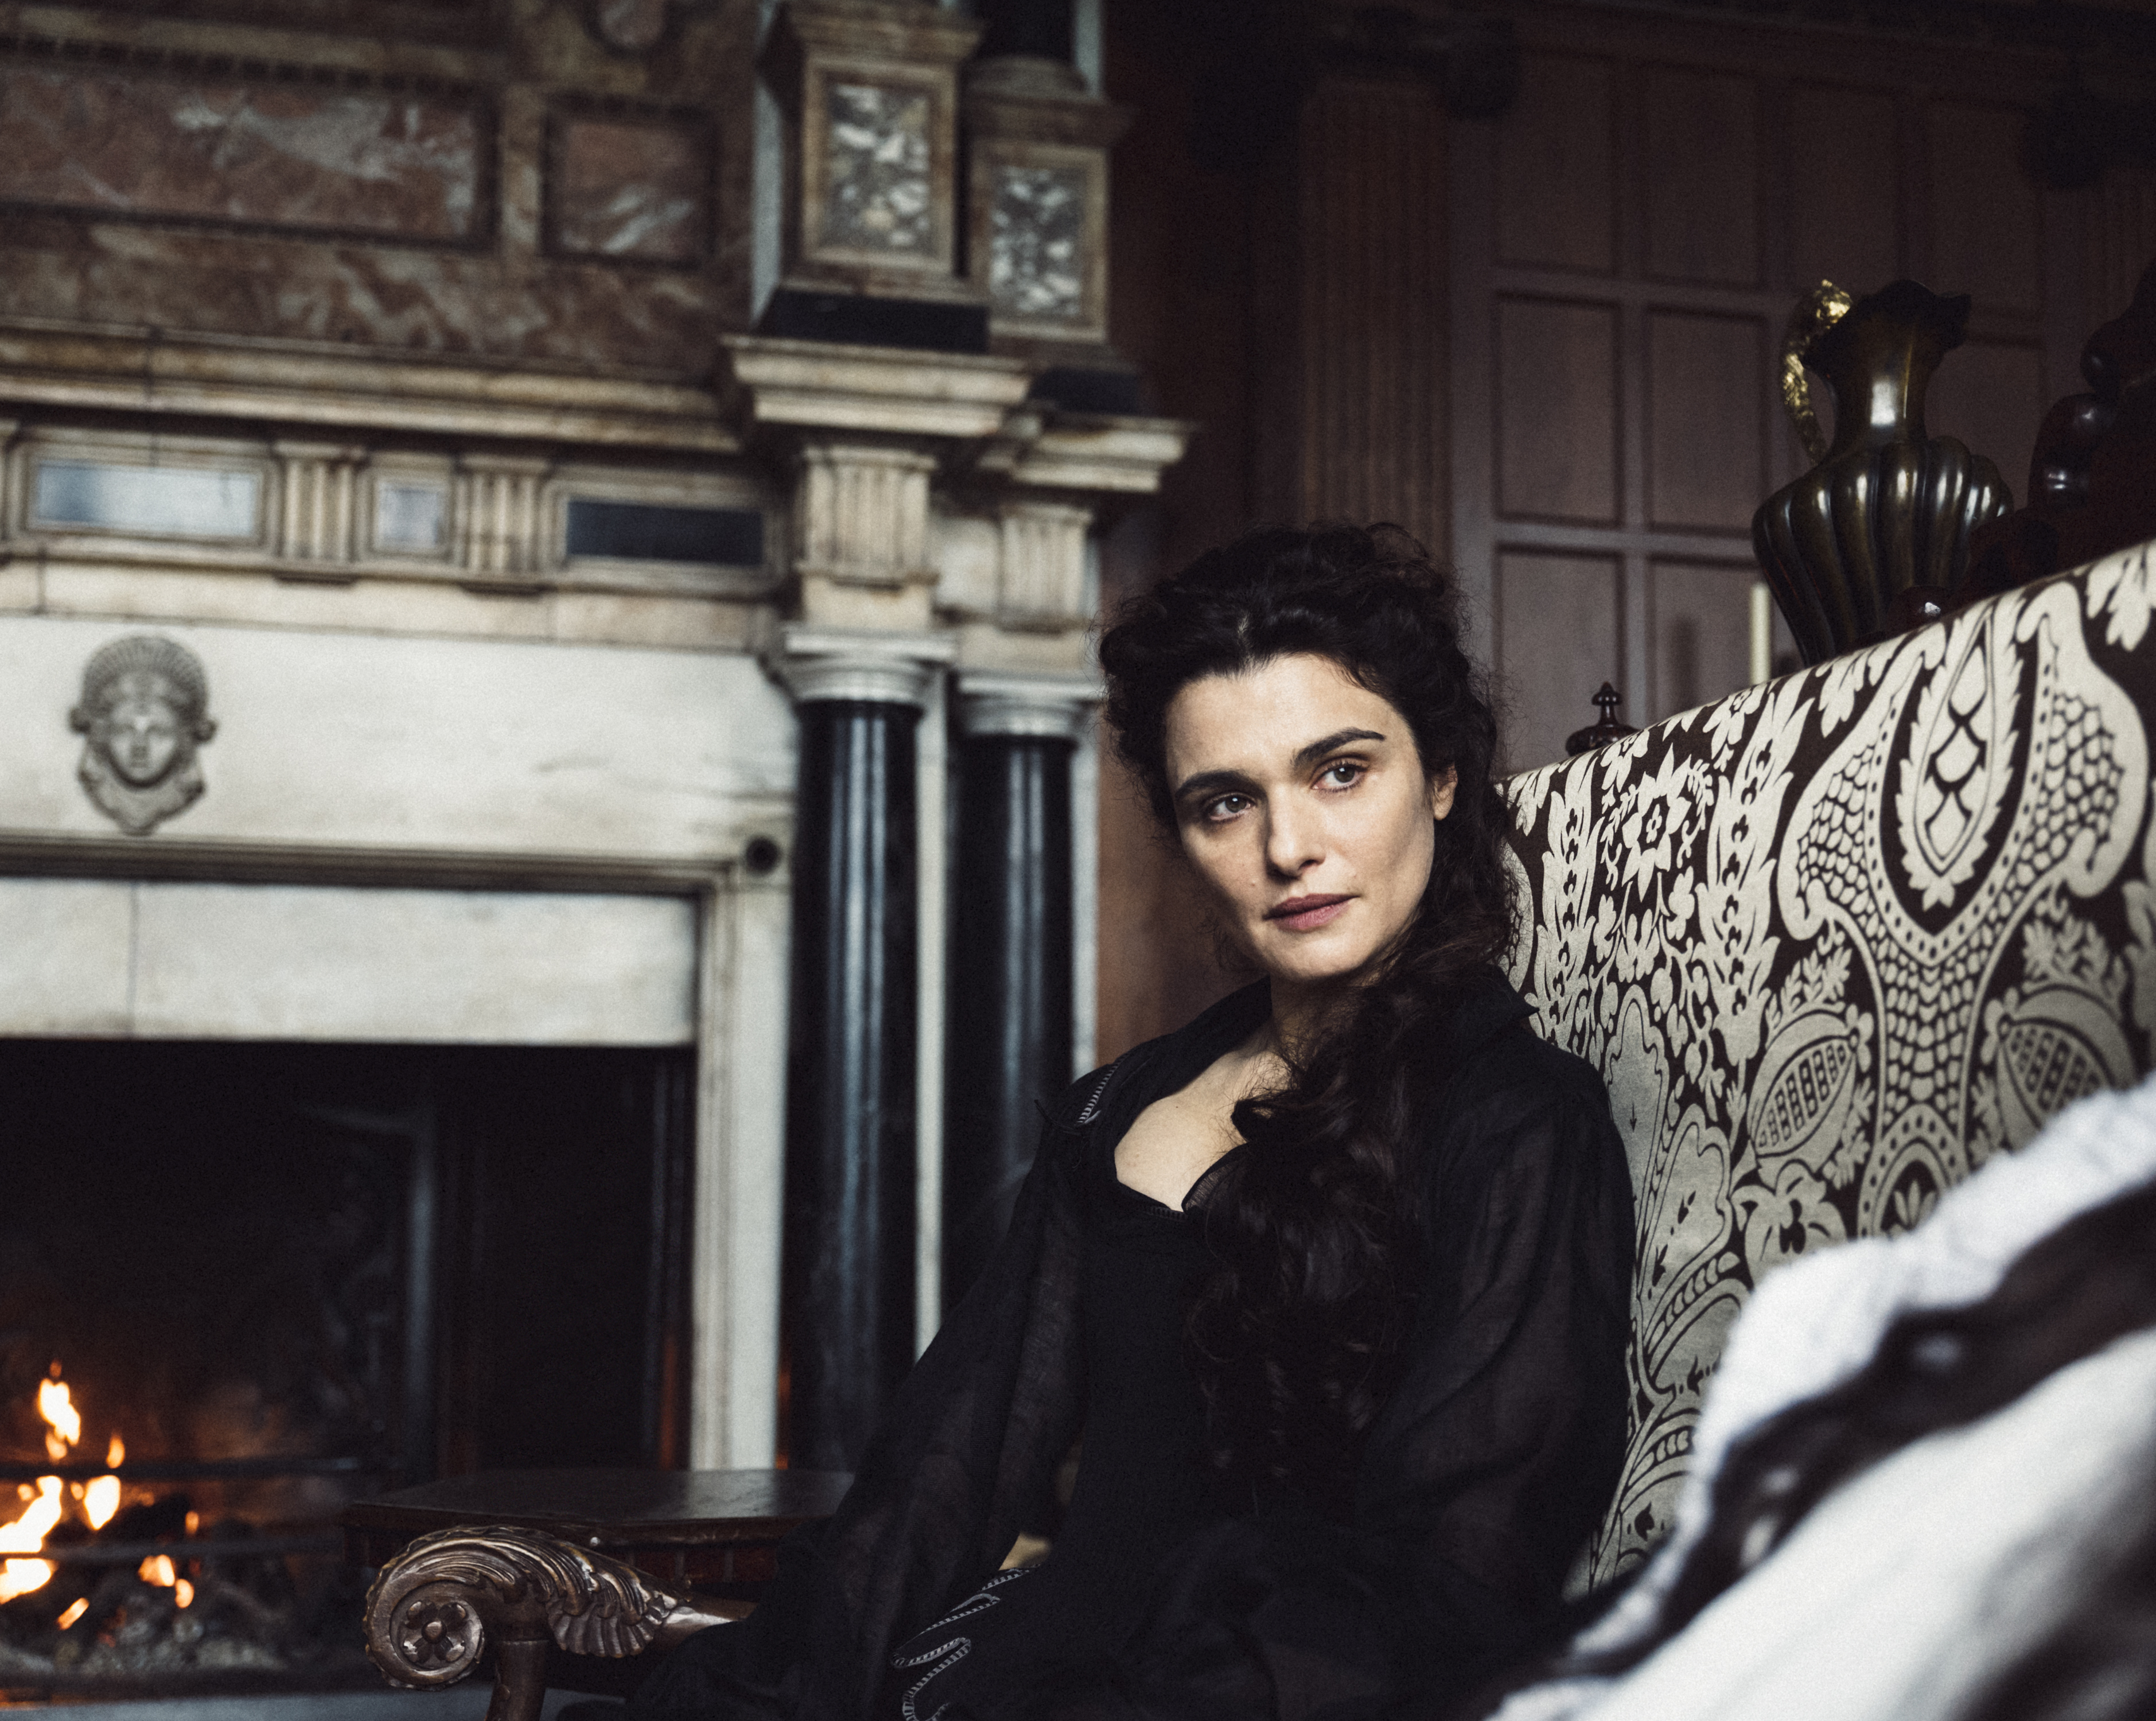 Rachel Weisz stars in Fox Searchlight Pictures' "THE FAVOURITE